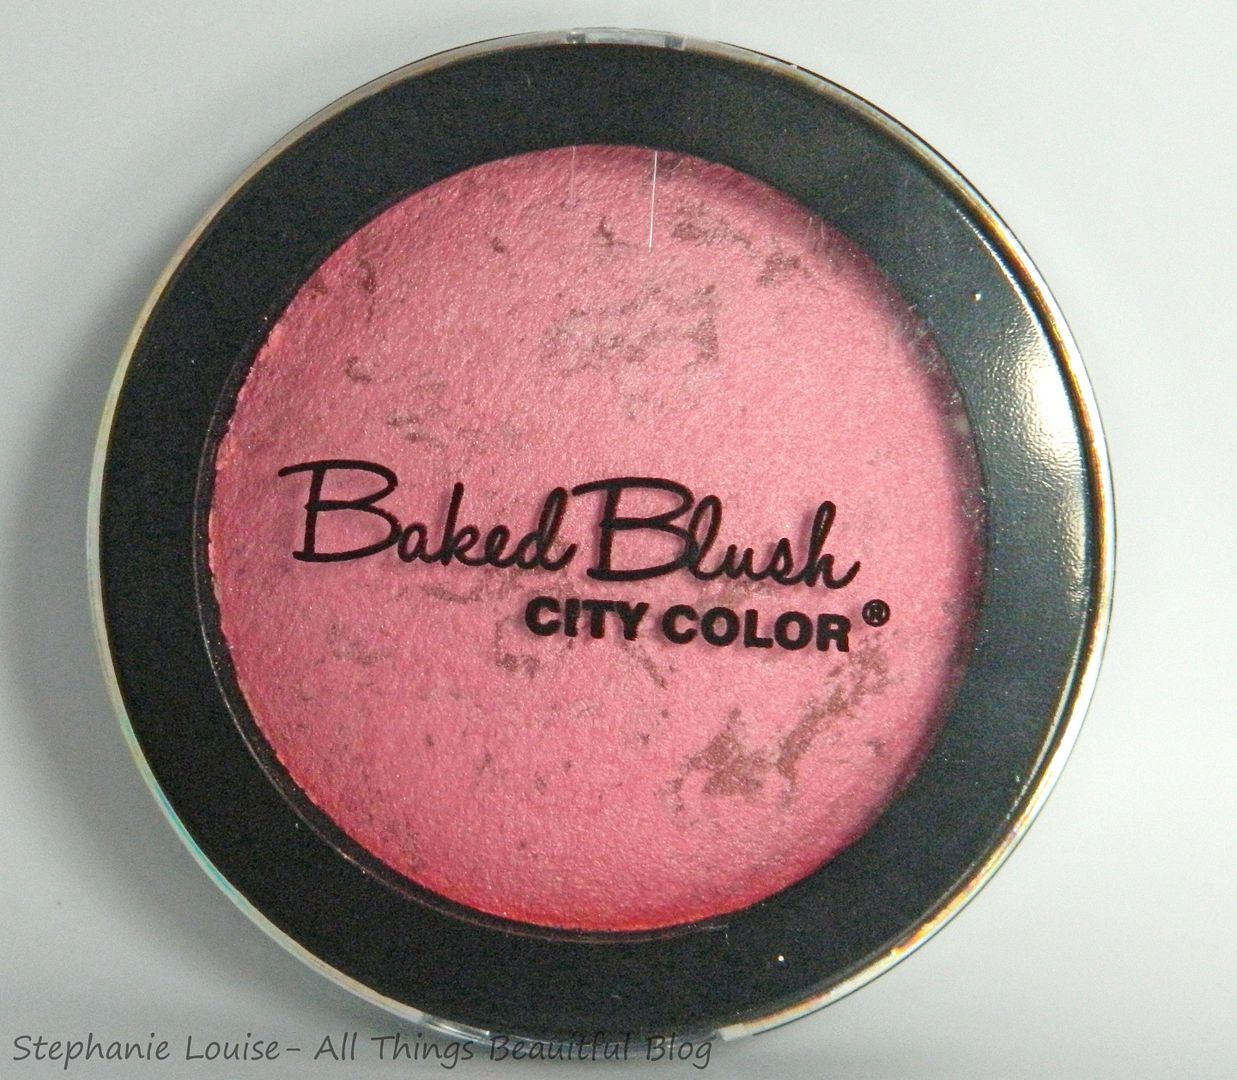 City Color Cosmetics Baked Blush in Pink Review & Swatches